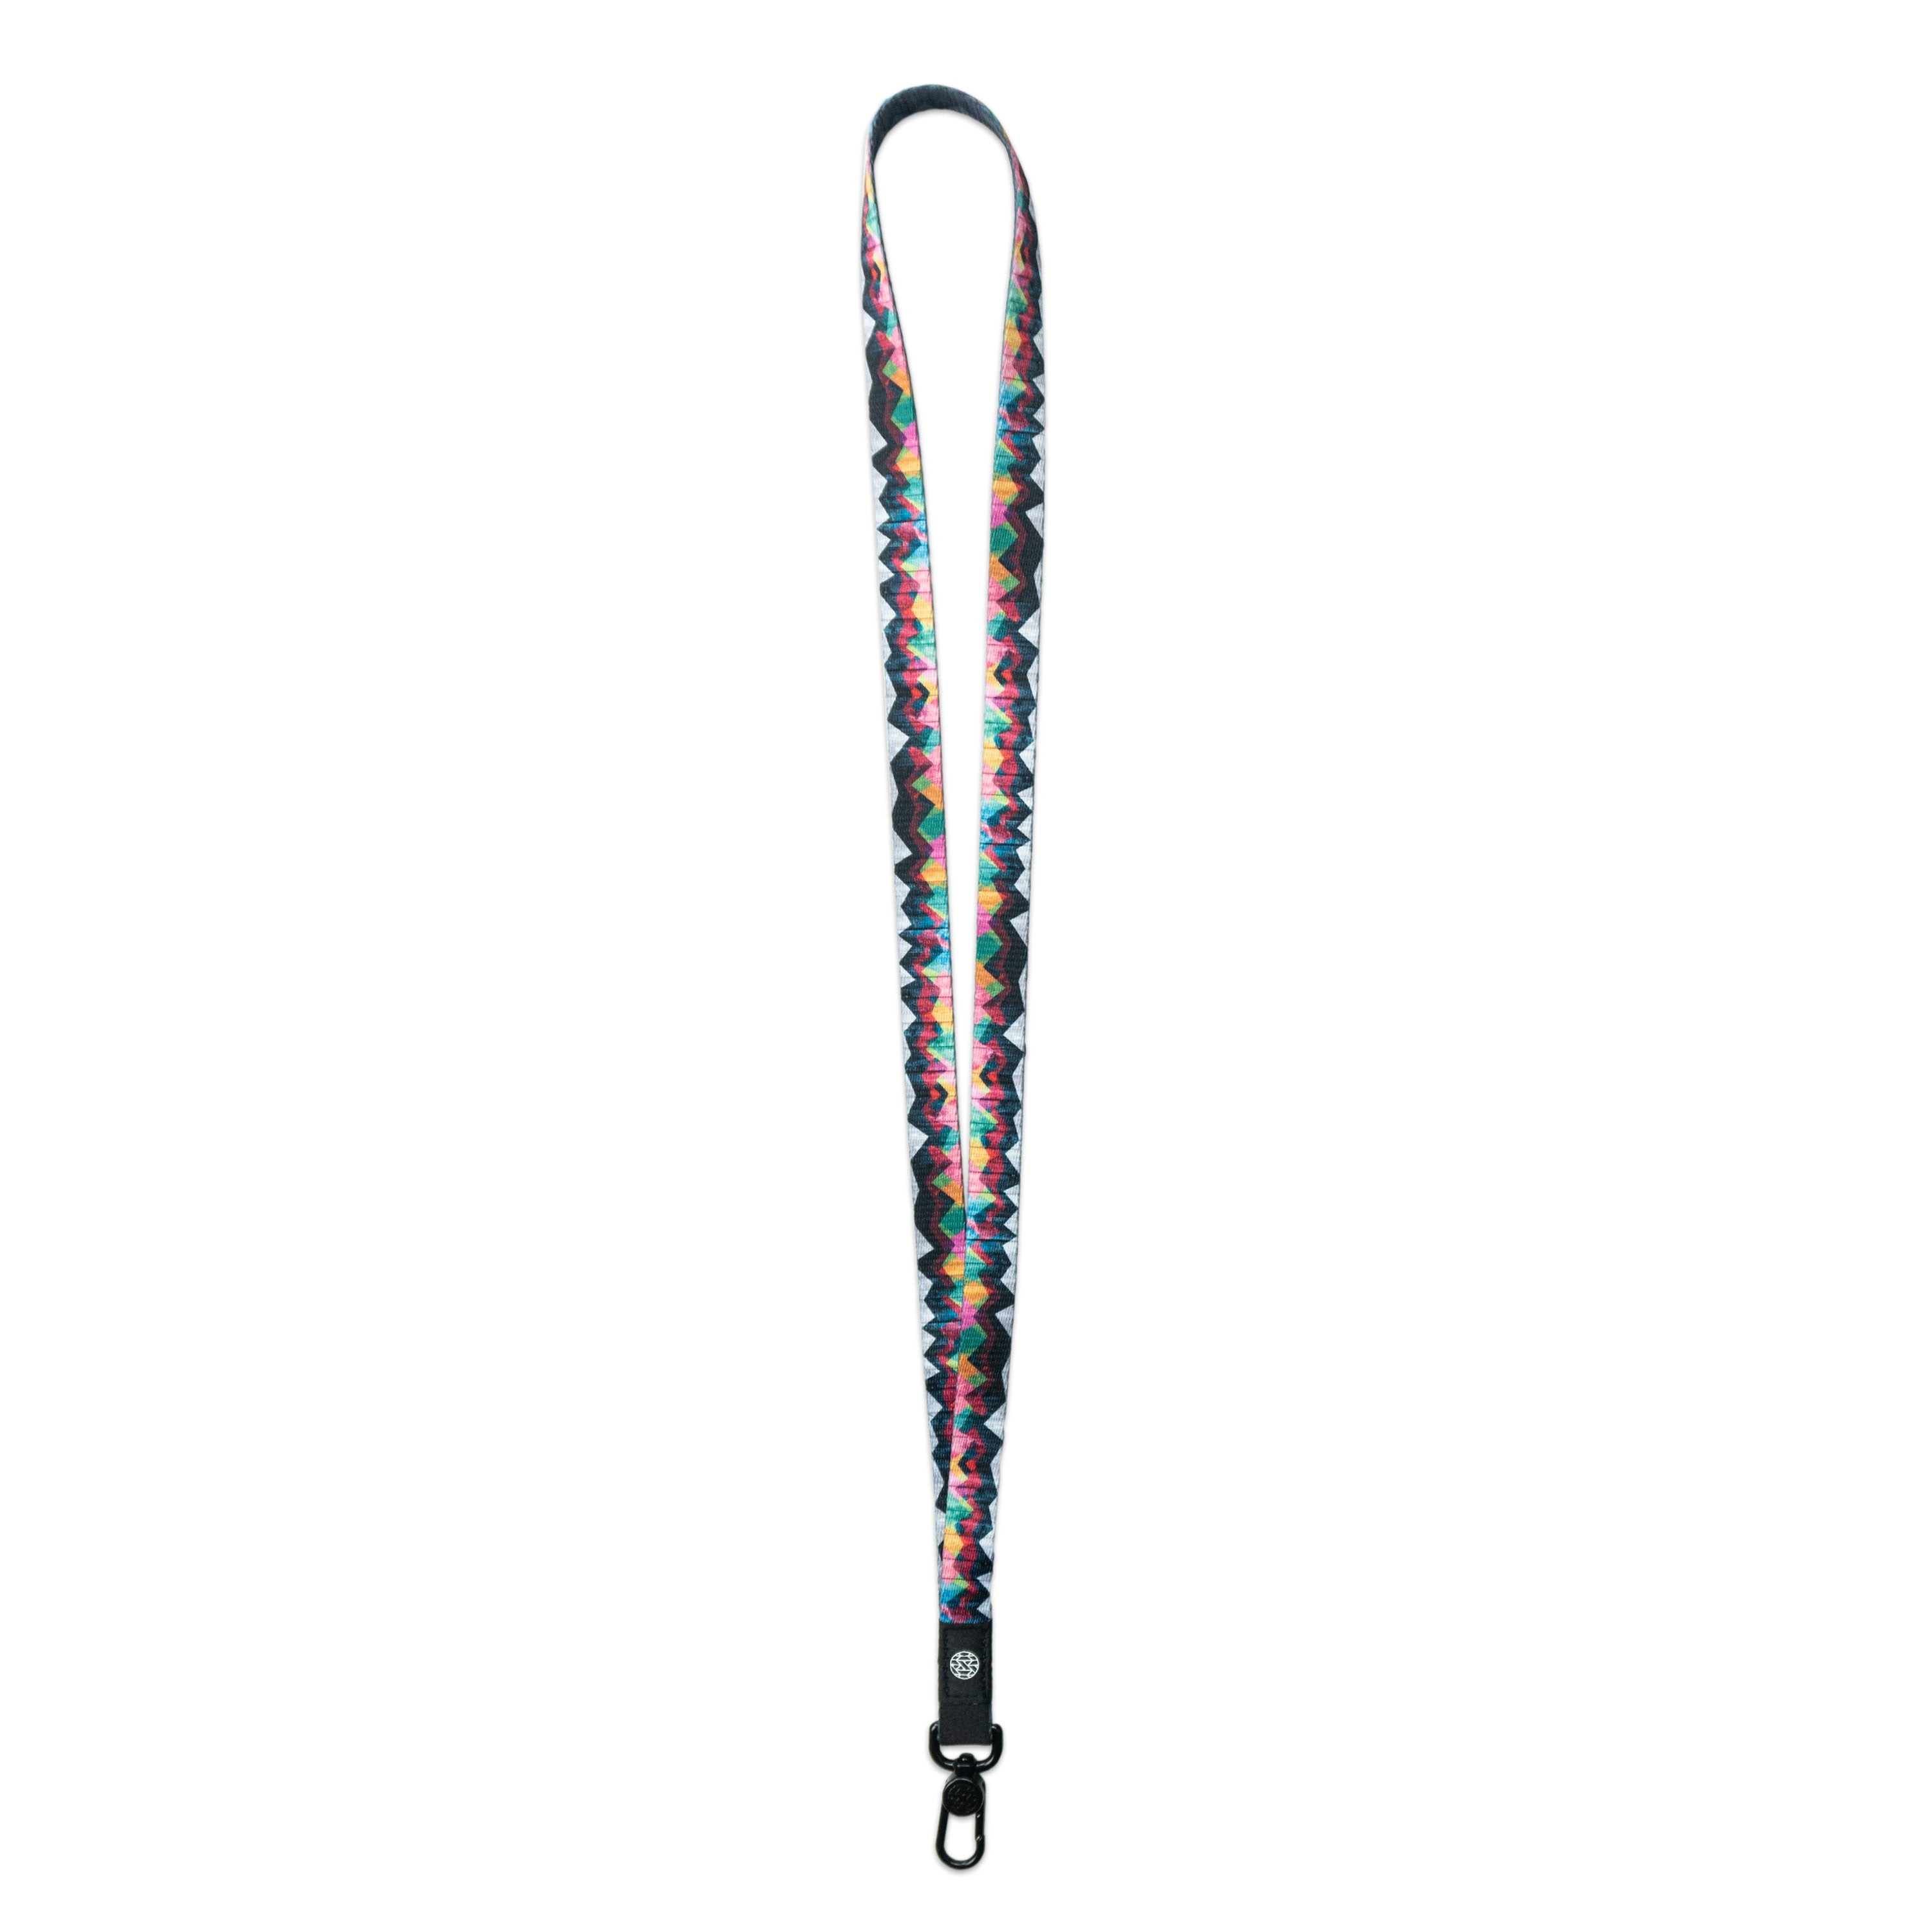 A product image of a ZOX lanyard showing the front of the design with a black colored metal clip. The lanyard is called Mountains To Molehills and the design is an geometric mountain range with mainly different colors such as blue, grey, blue, green, orange, yellow, and pink 